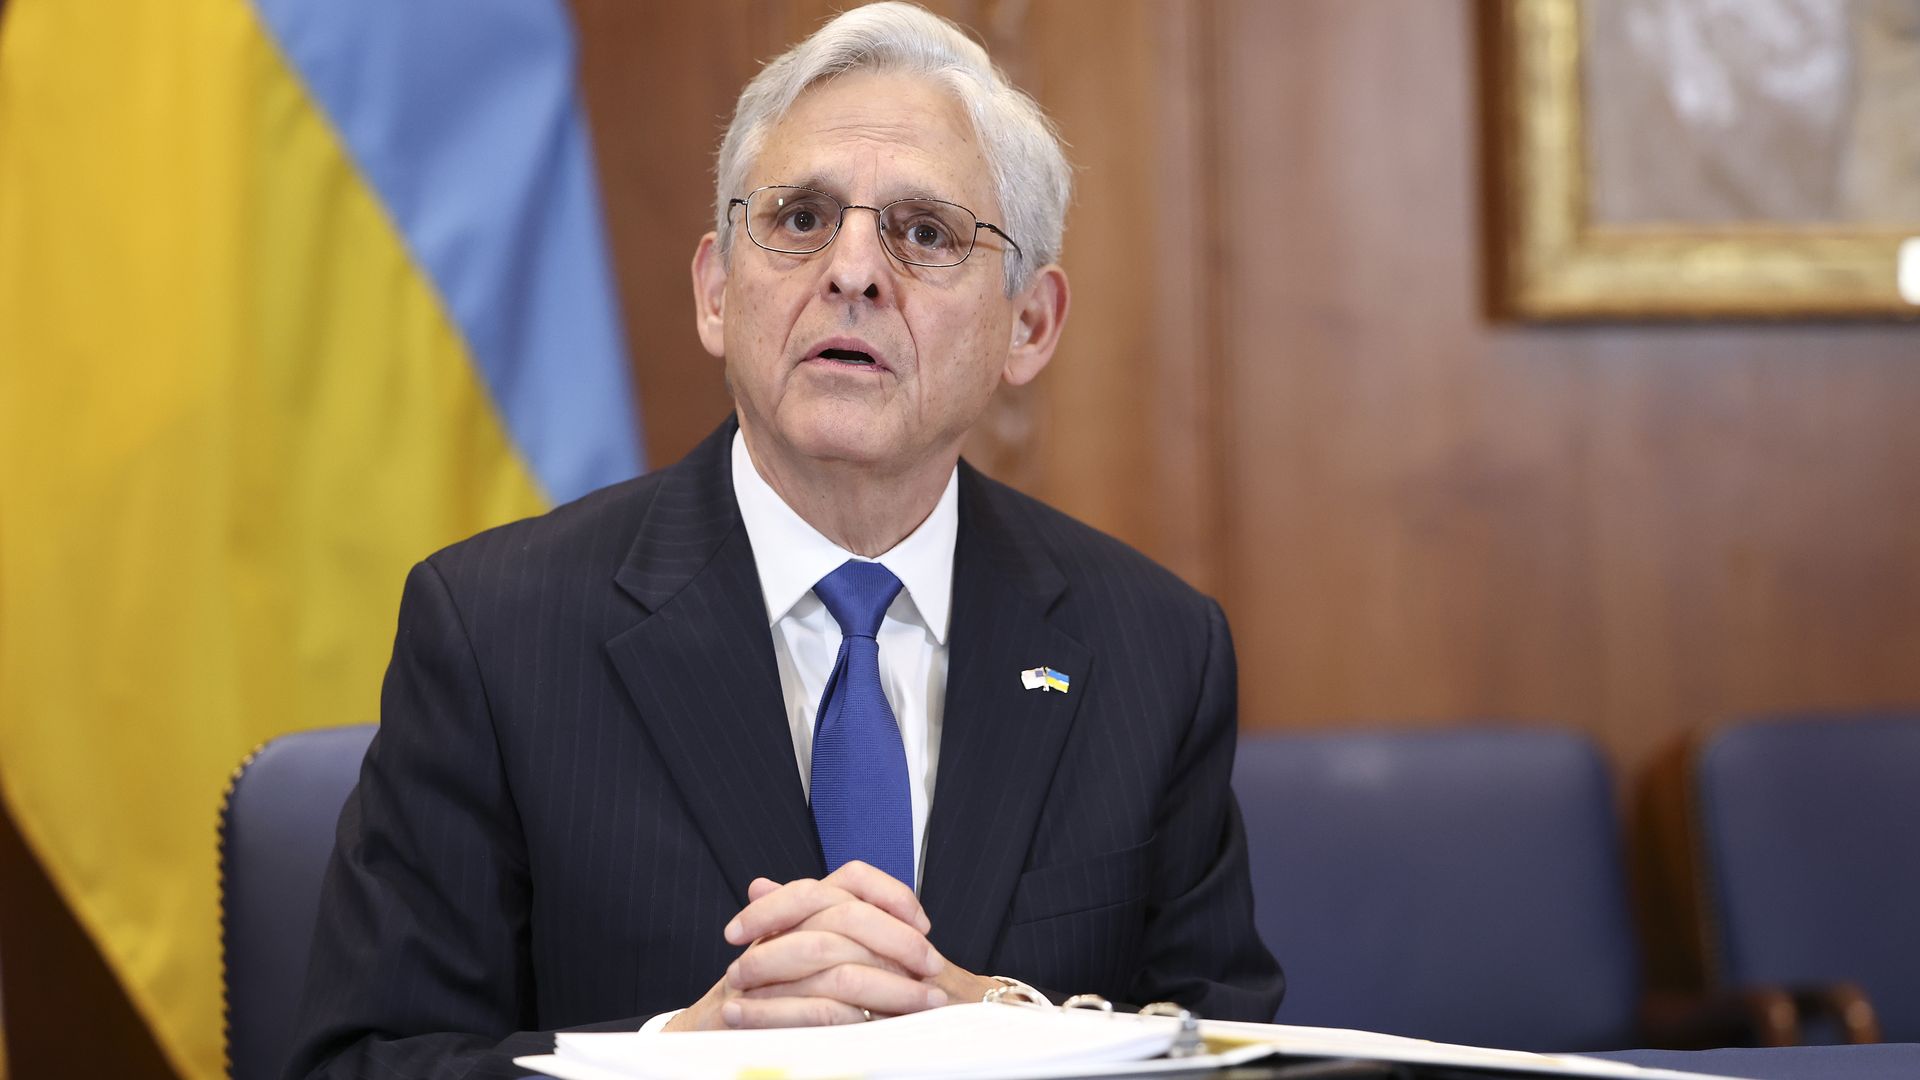 Merrick Garland participating in a signing ceremony with Ukrainian Prosecutor General Andriy Kostin at the Department of Justice in September 2022 in Washington, D.C.